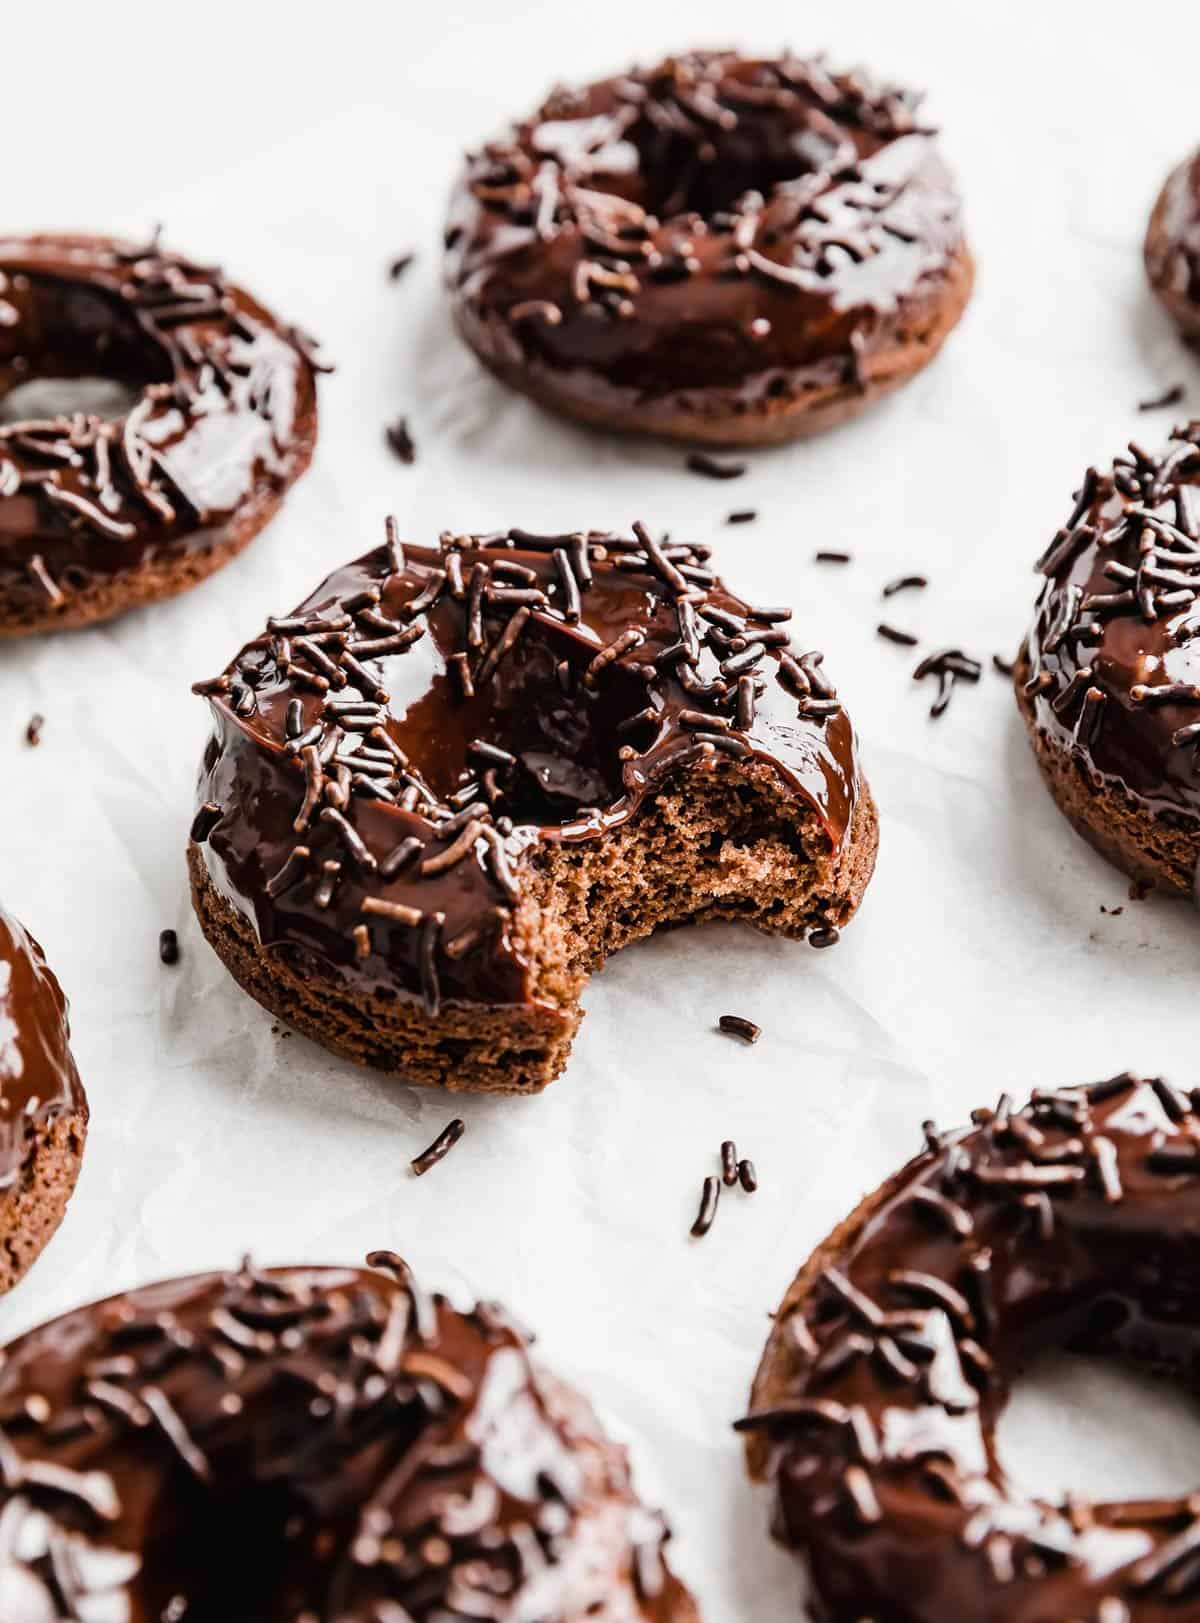 Baked Chocolate Doughnuts topped with chocolate sprinkles, with a bite taken out of one doughnut.